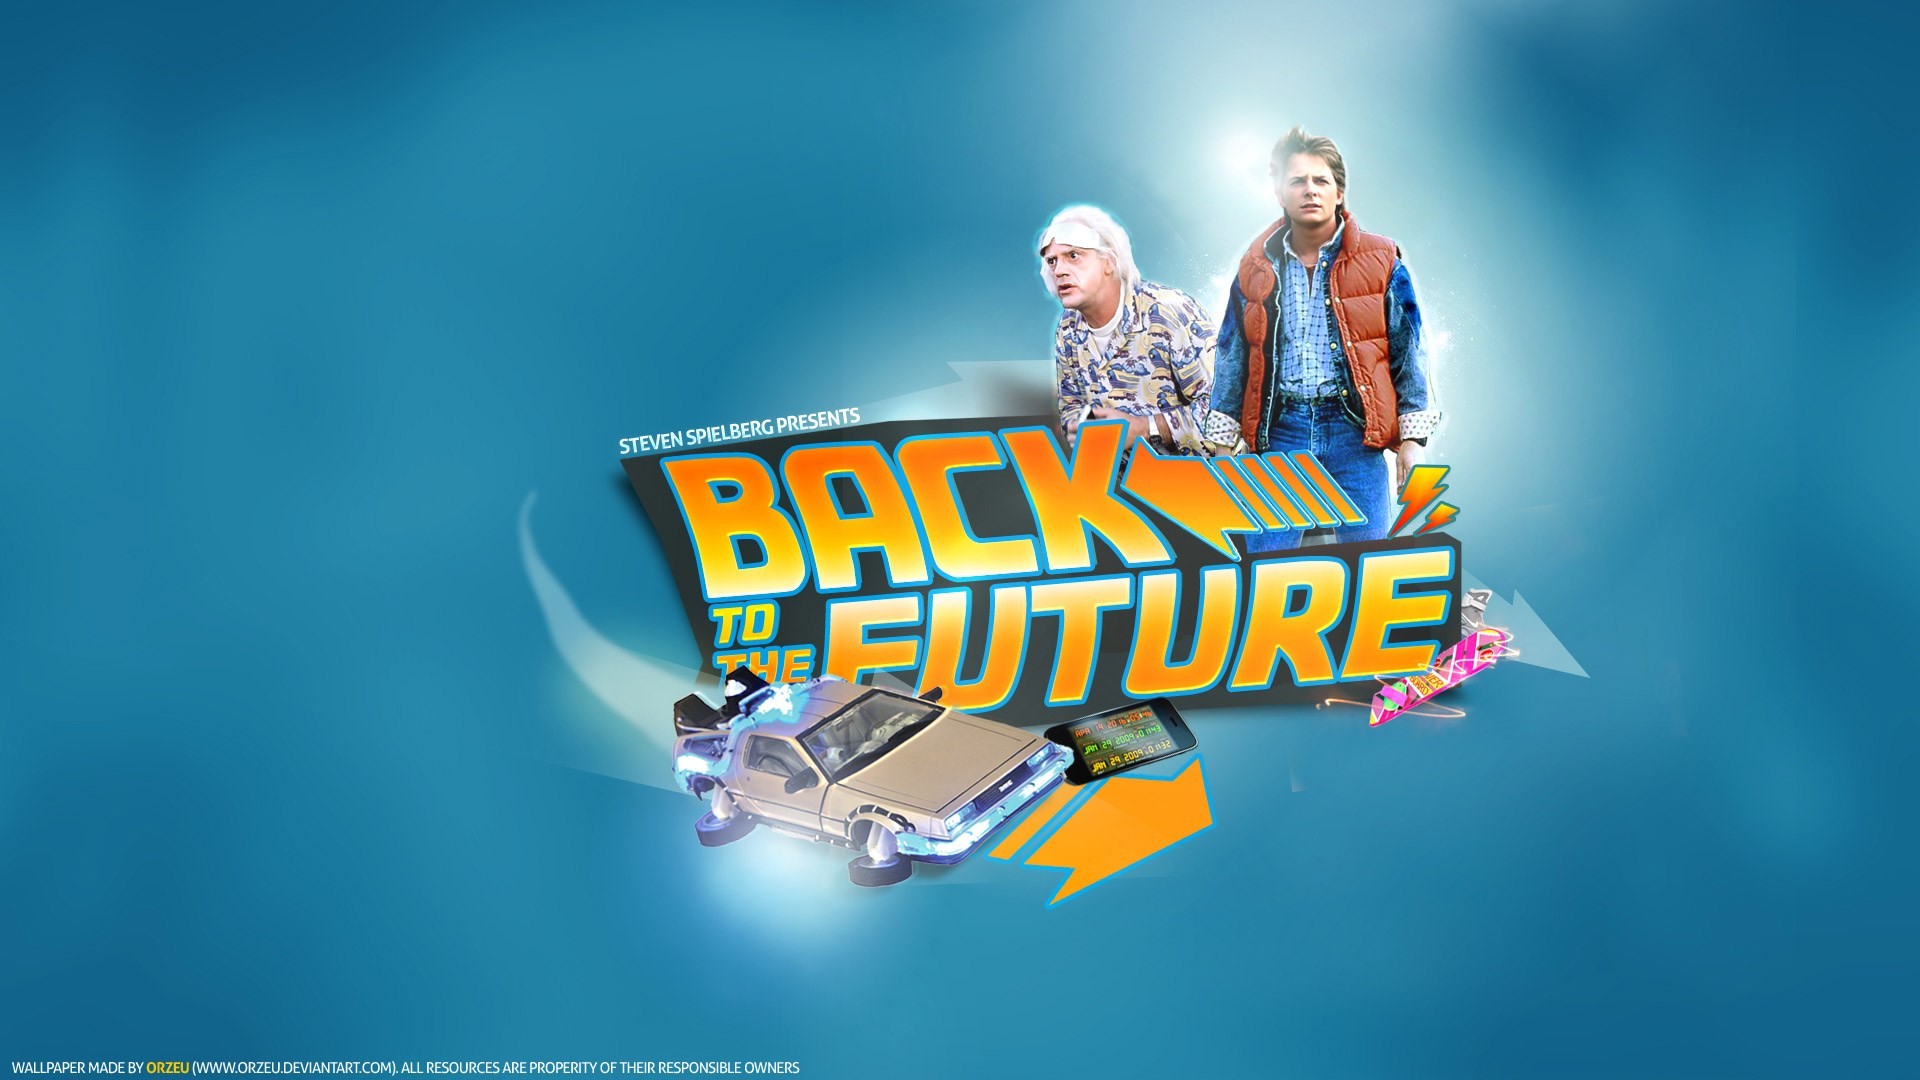 Back to the future computer wallpaper backgrounds – back to the future category